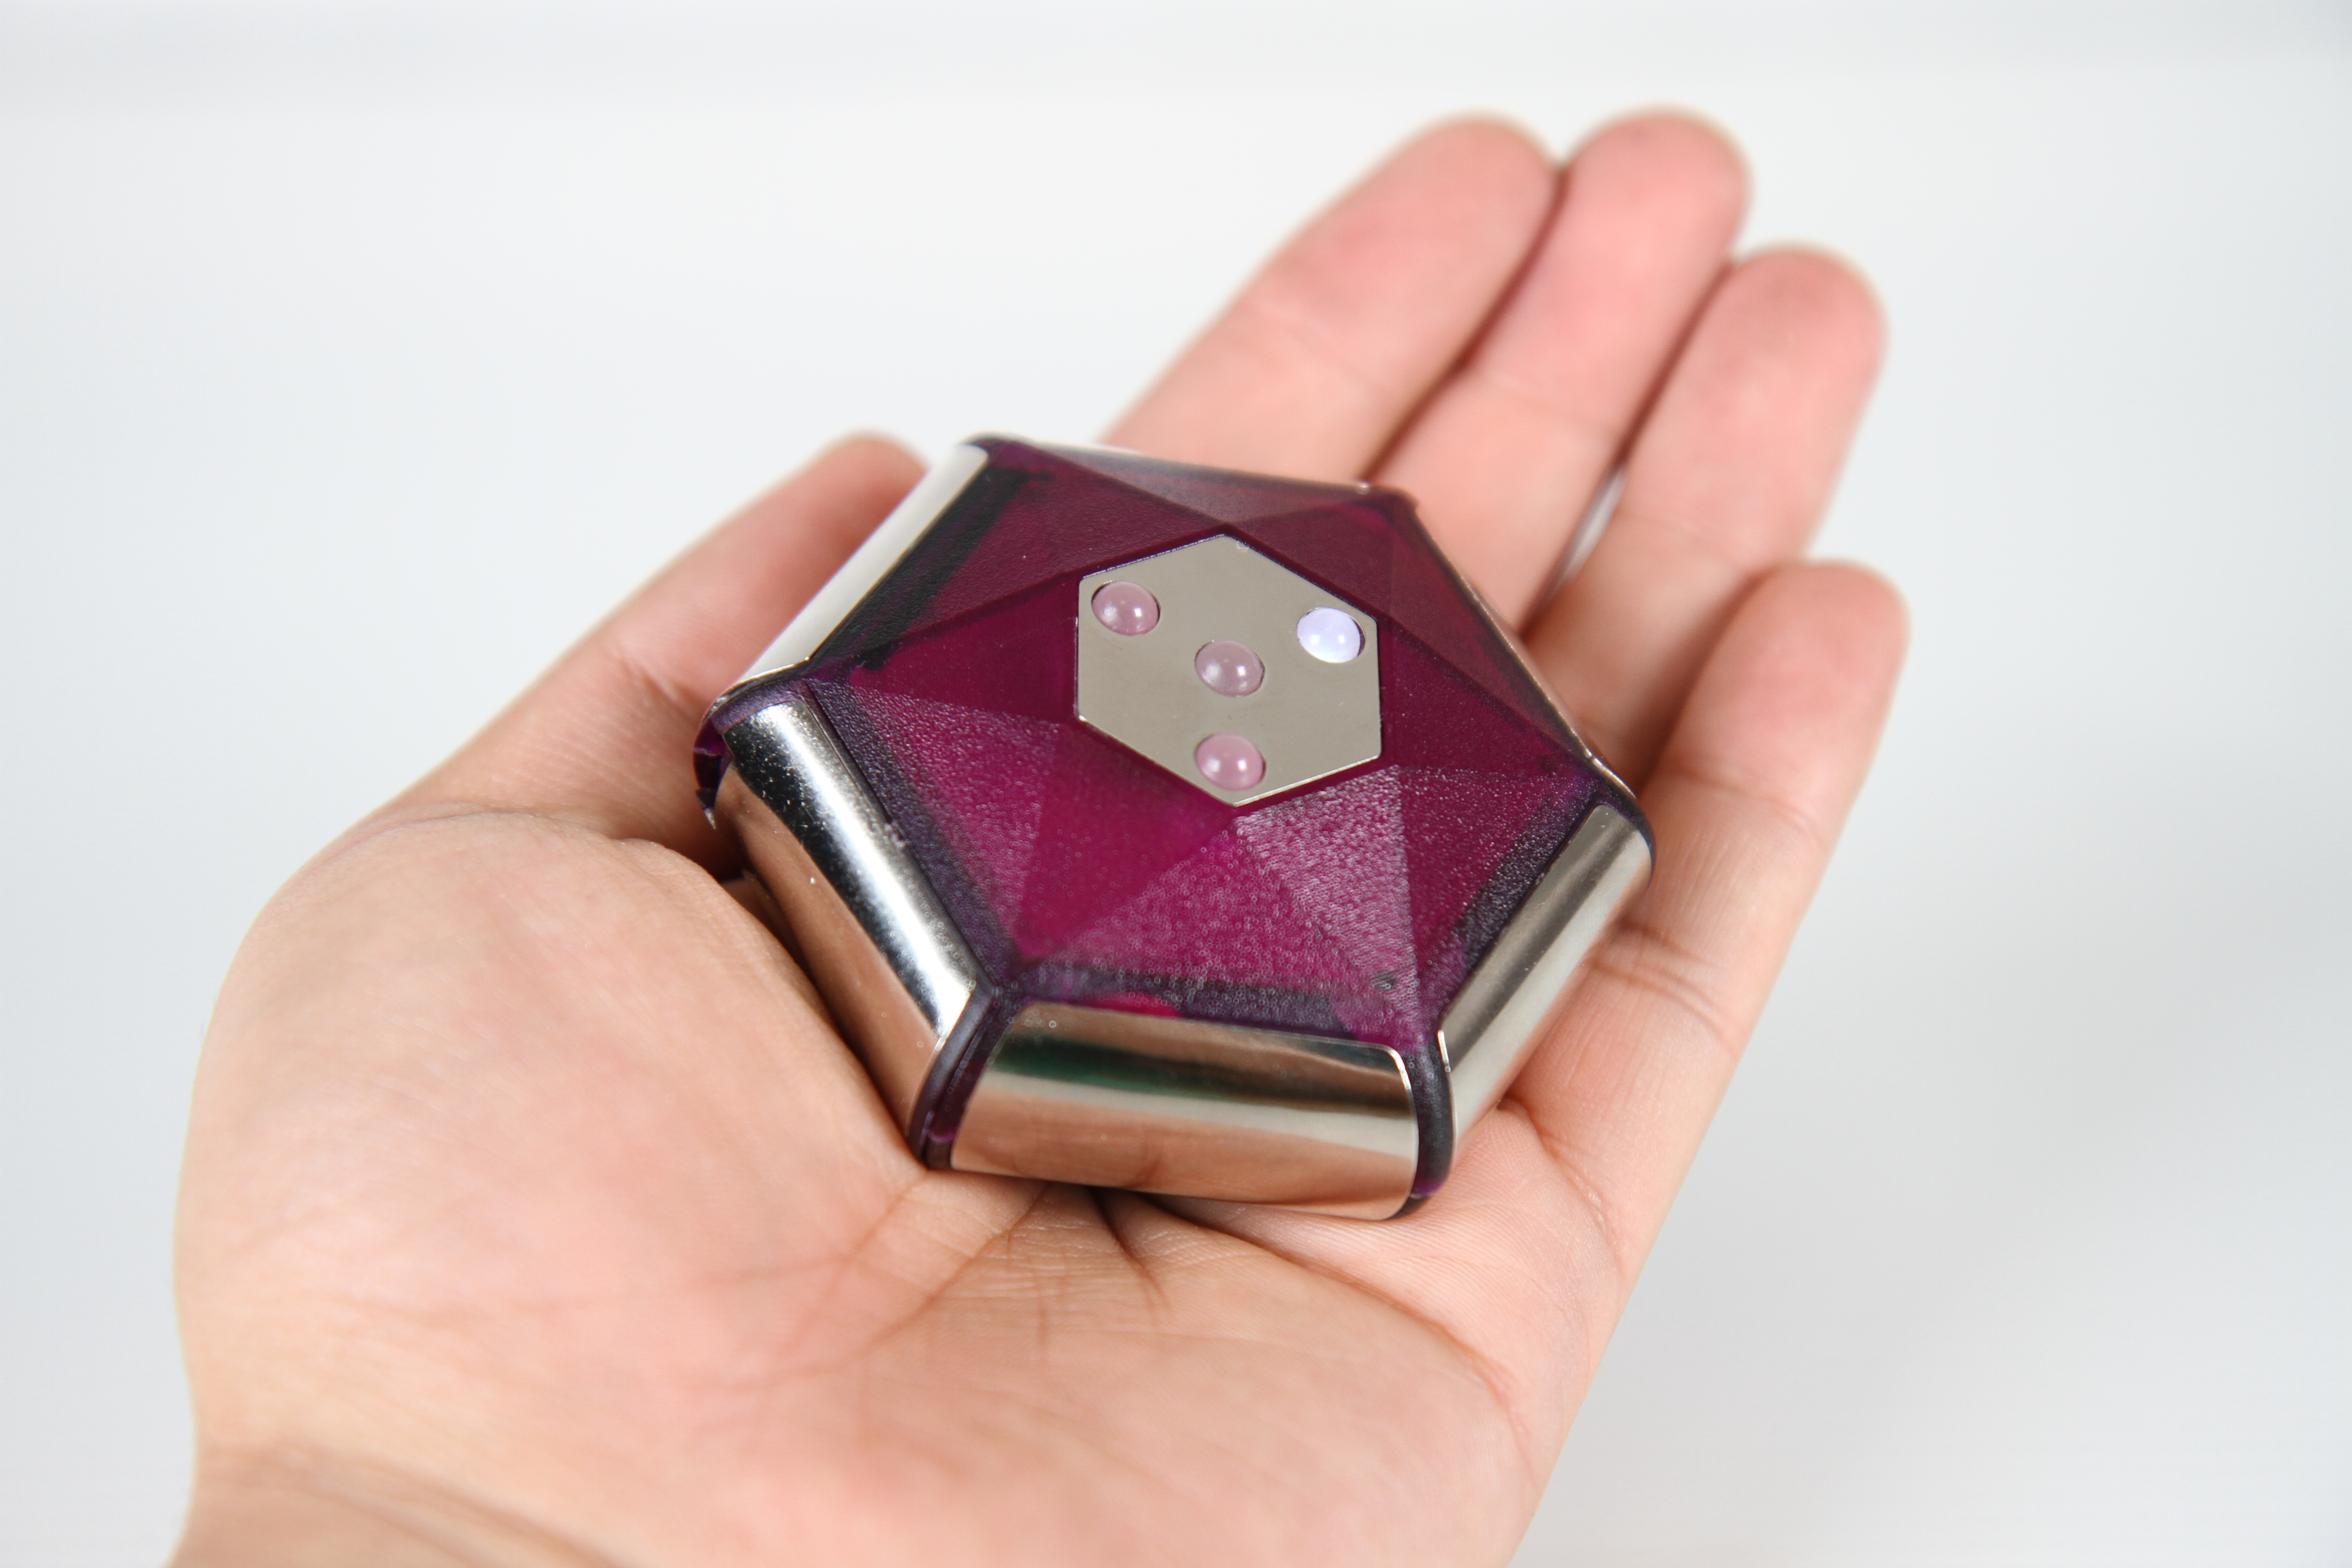 Photograph of Noumic device top view. Made from large metalic electro-sensors and purple plastic, four colour LEDs.